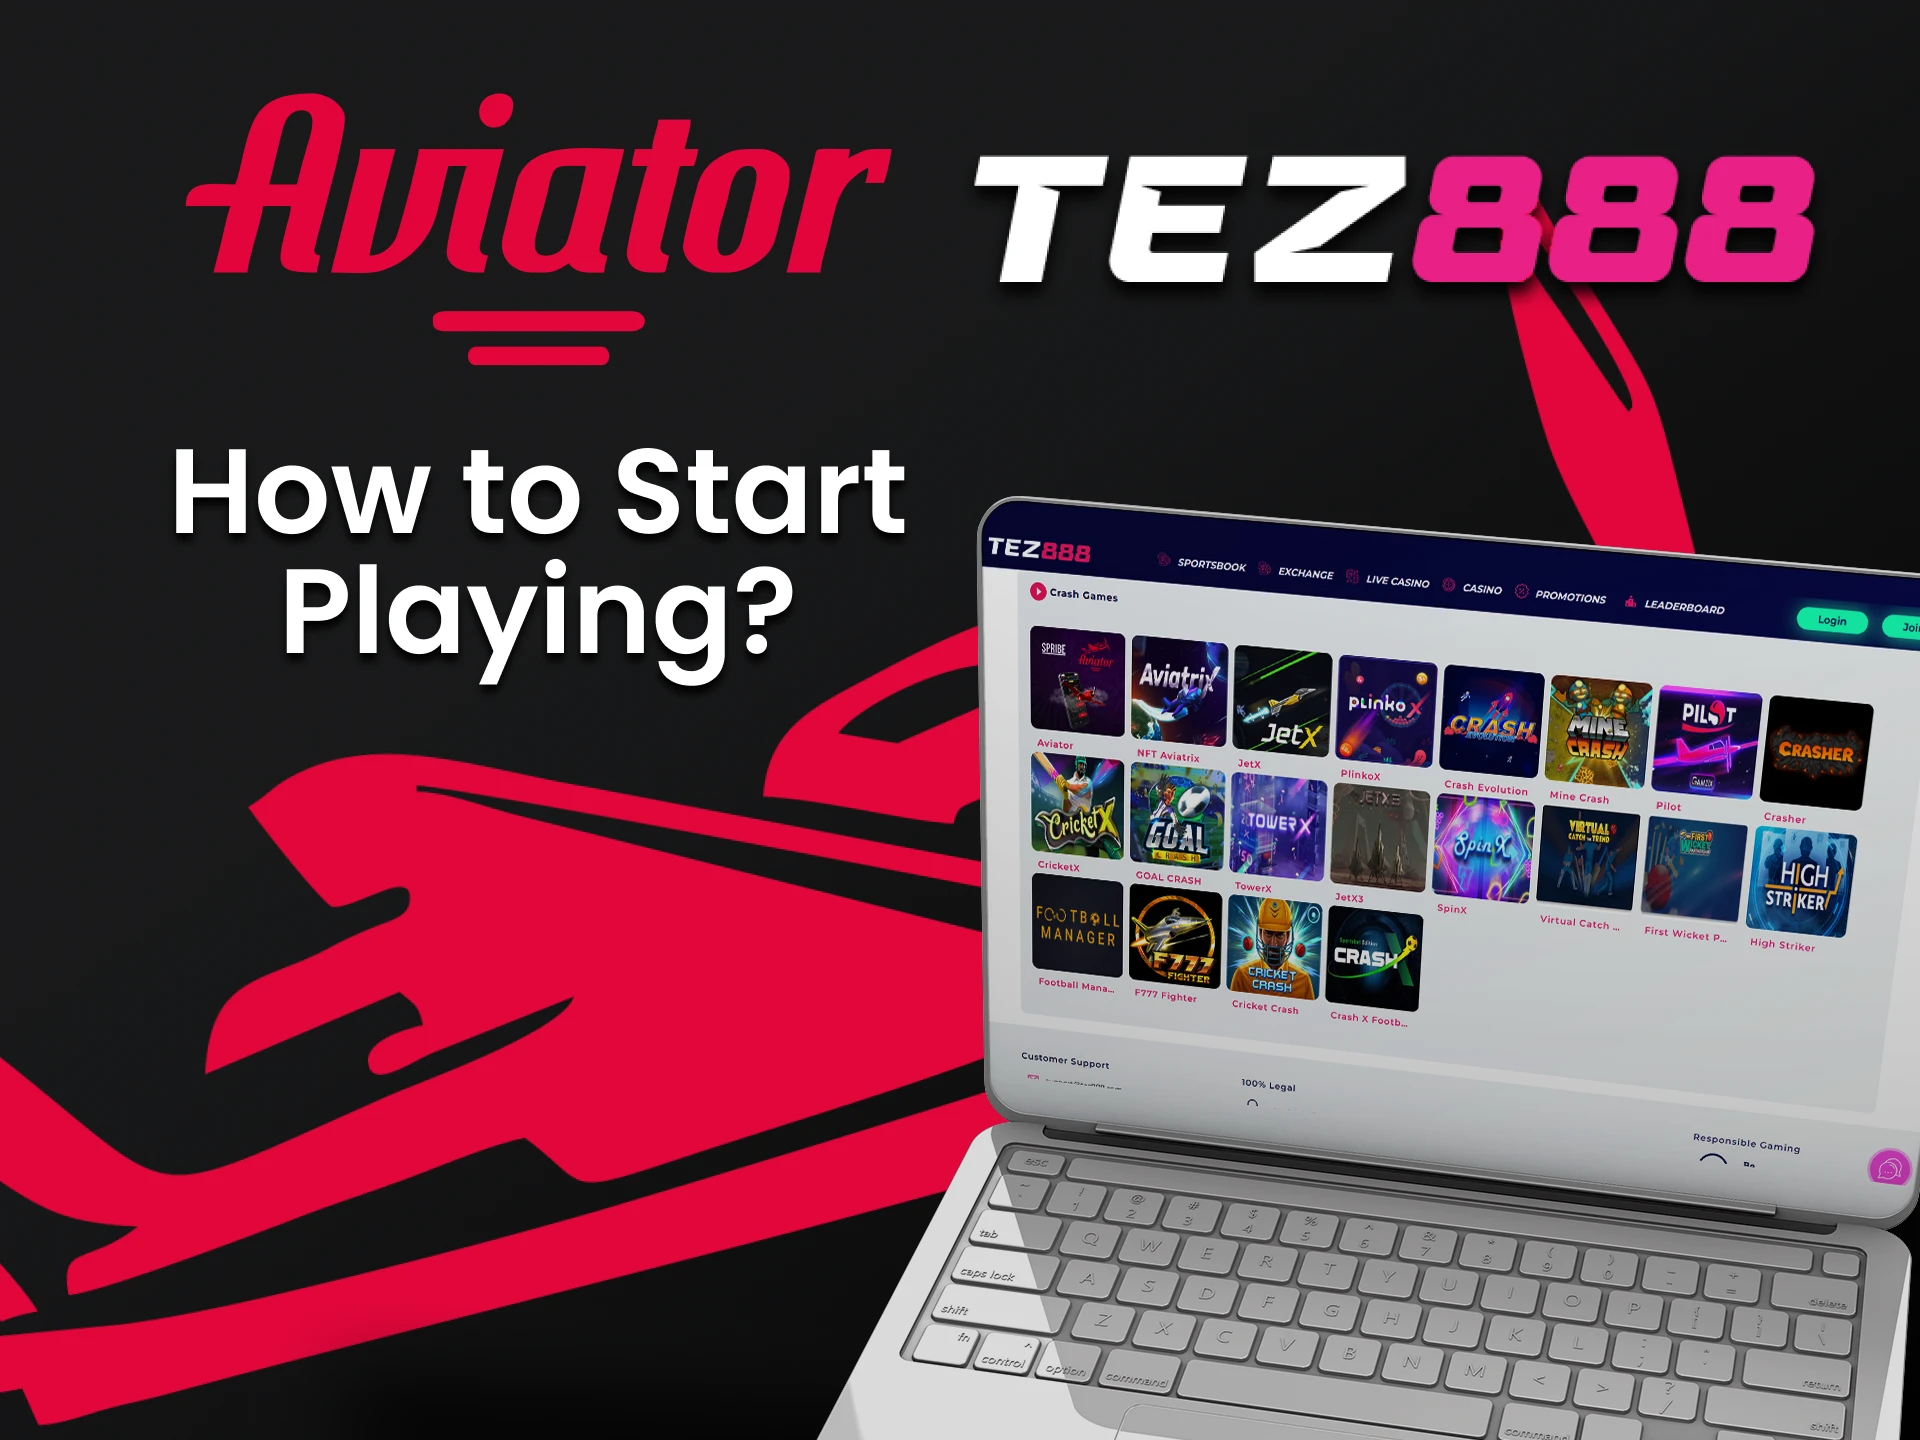 Go to the casino section of the Tez888 website to play Aviator.